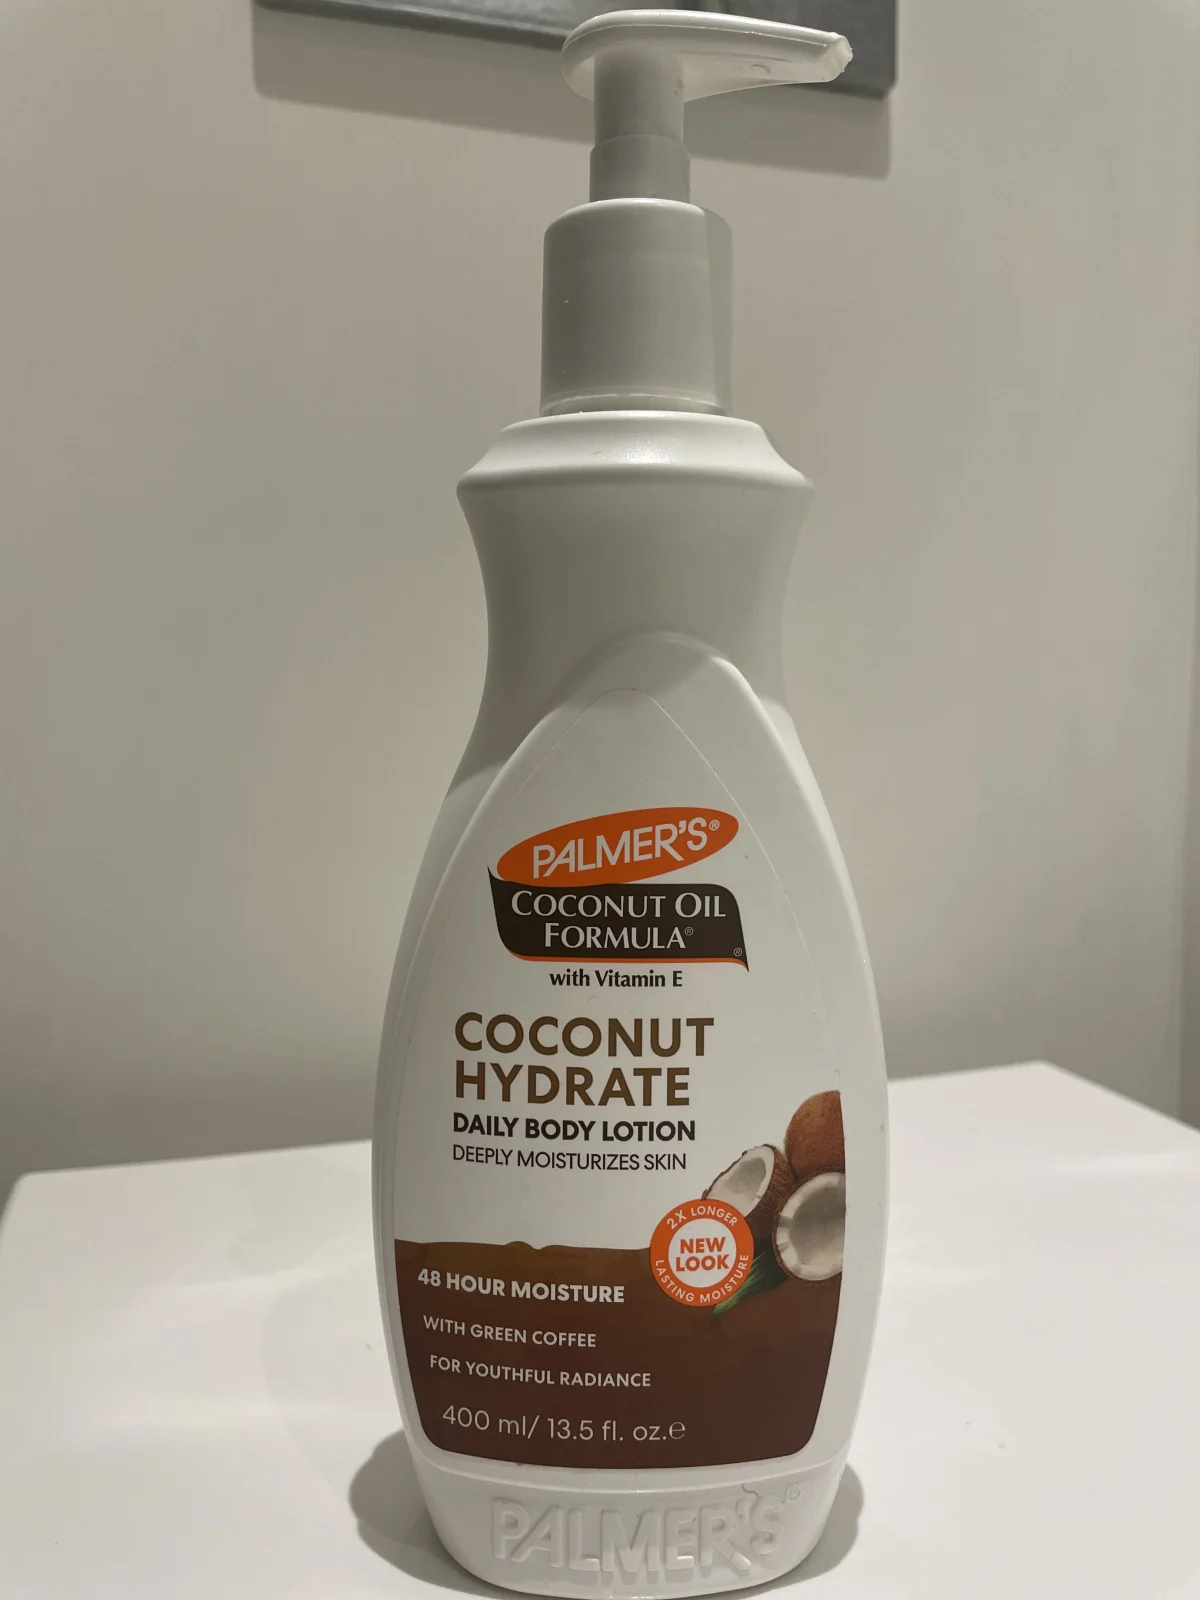 Palmer's Coconut Oil Formula Body Lotion - review image